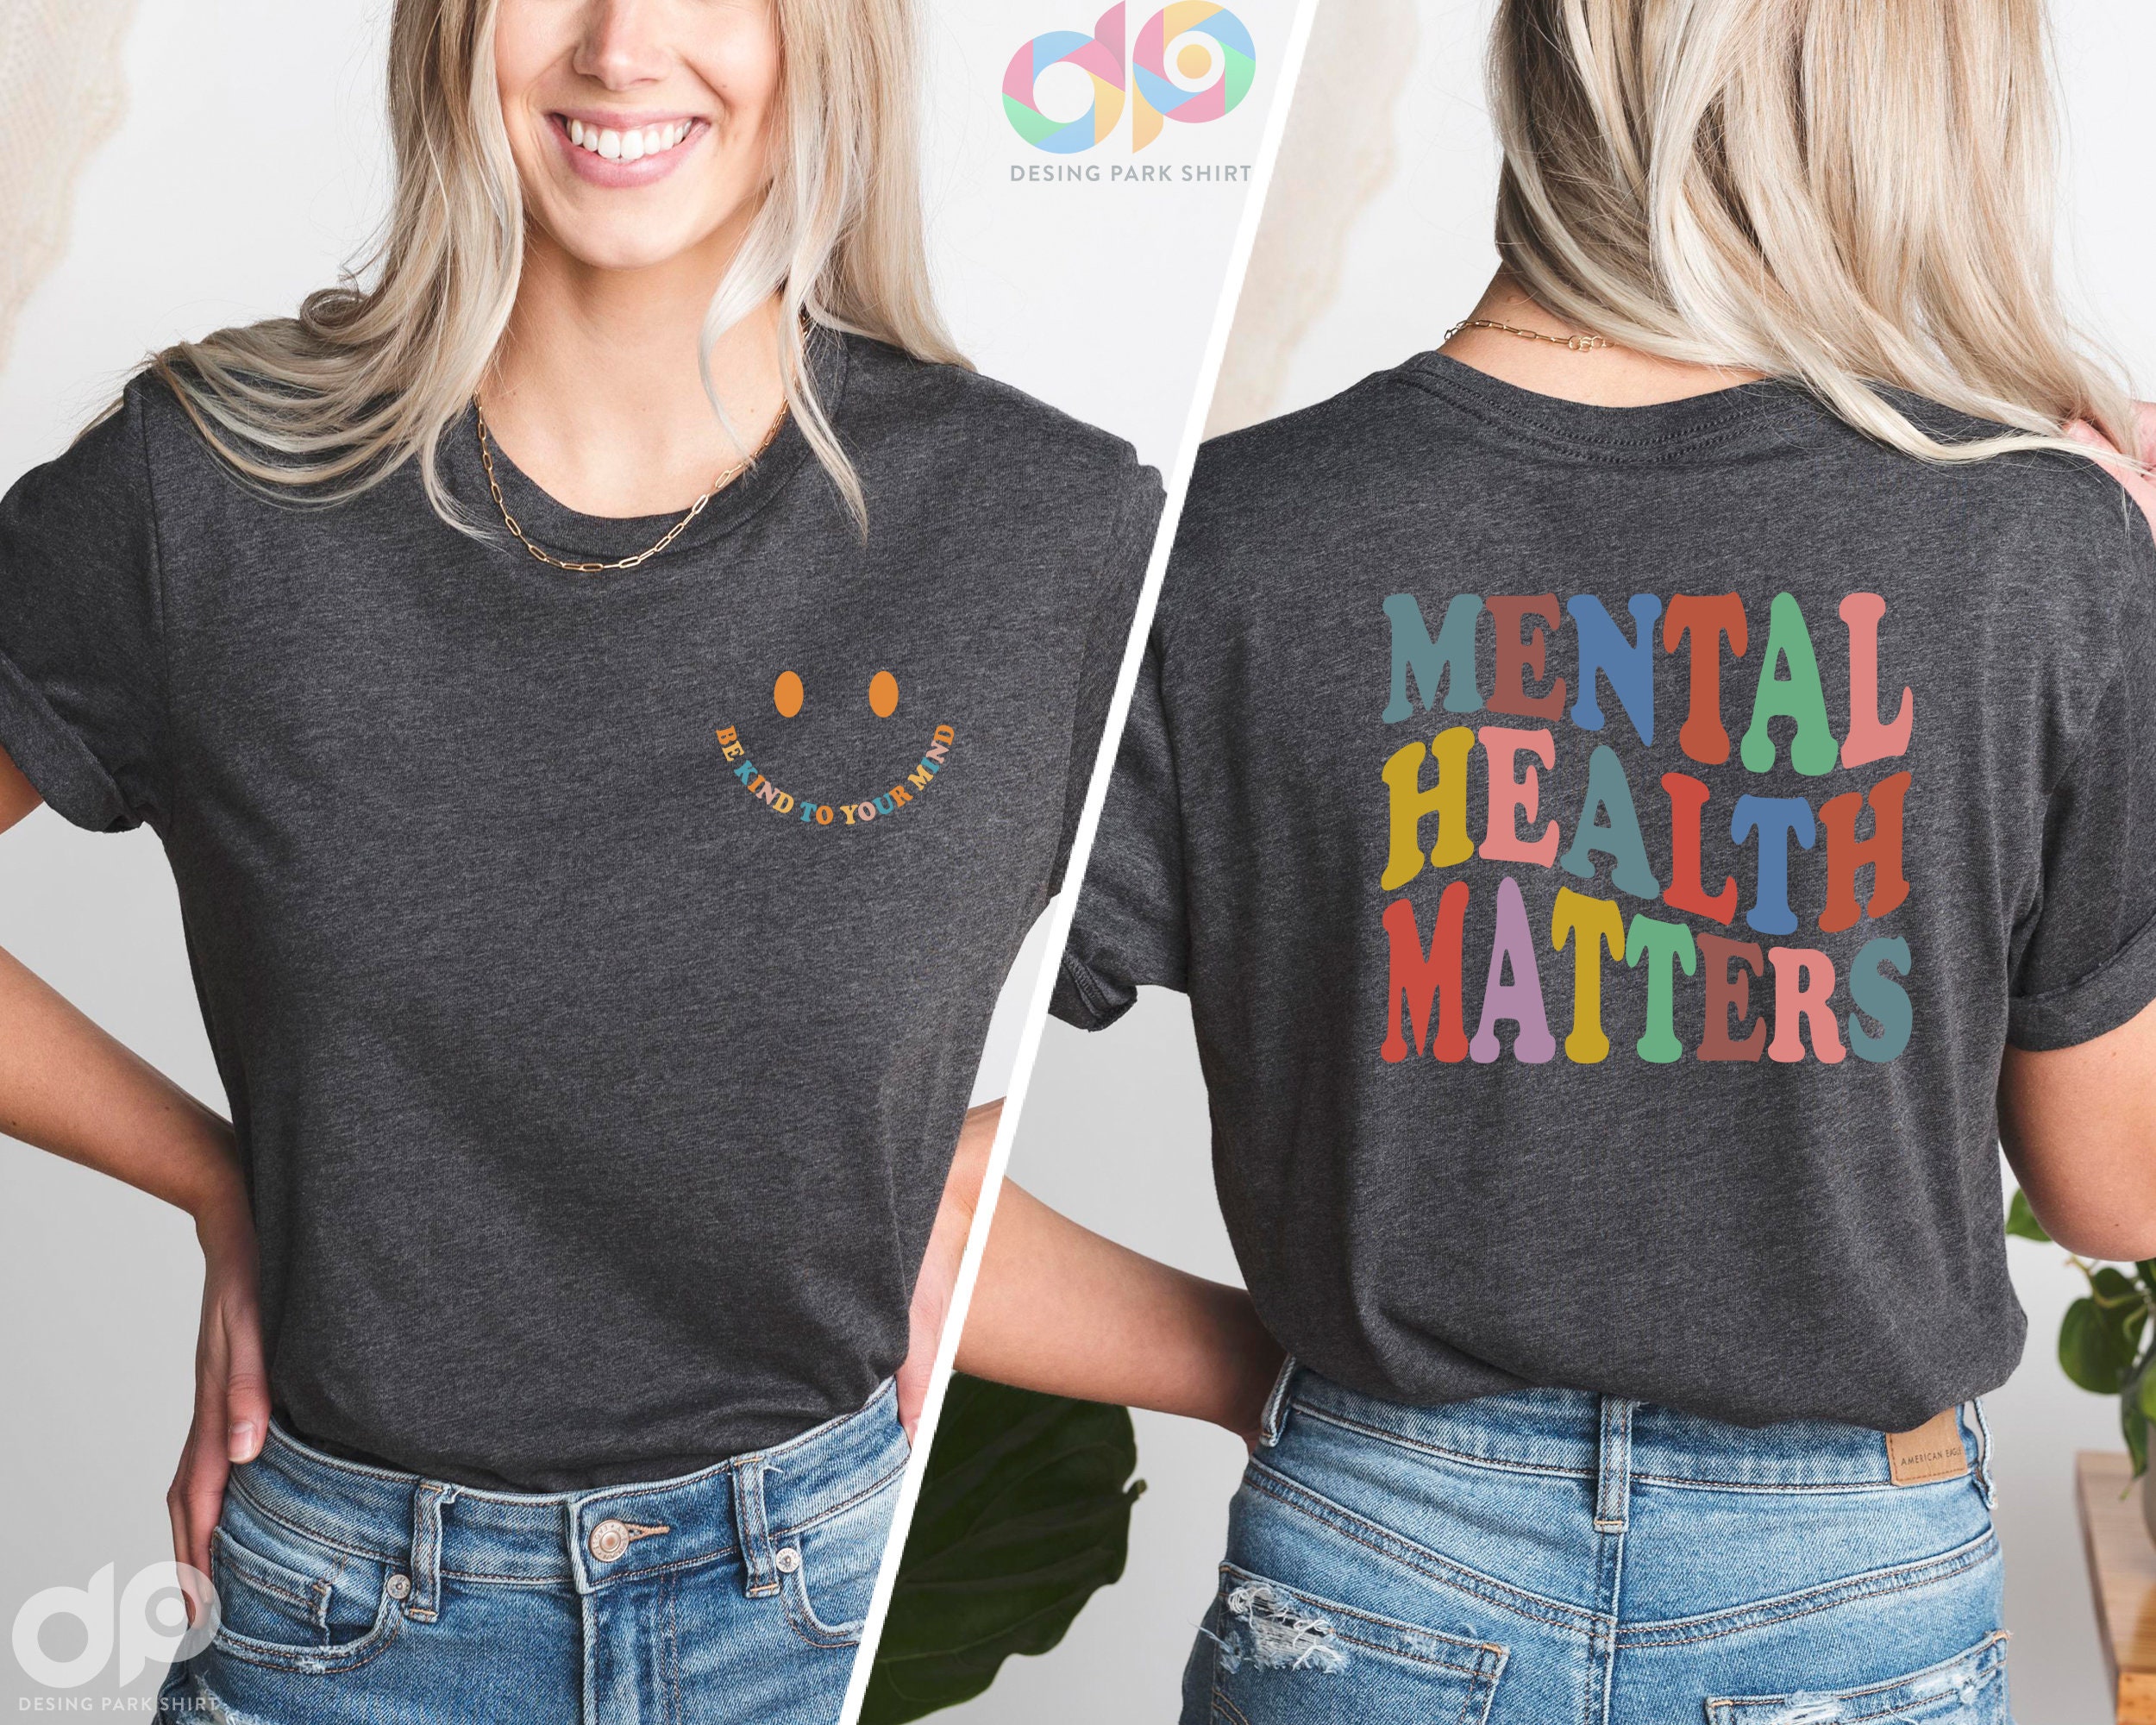 Discover Mental Health Matters Shirt, Be Kind To Your Mind, Mental Health Shirt, Positive Quotes, Women Mental Health, Anxiety Shirt, Therapist Tee